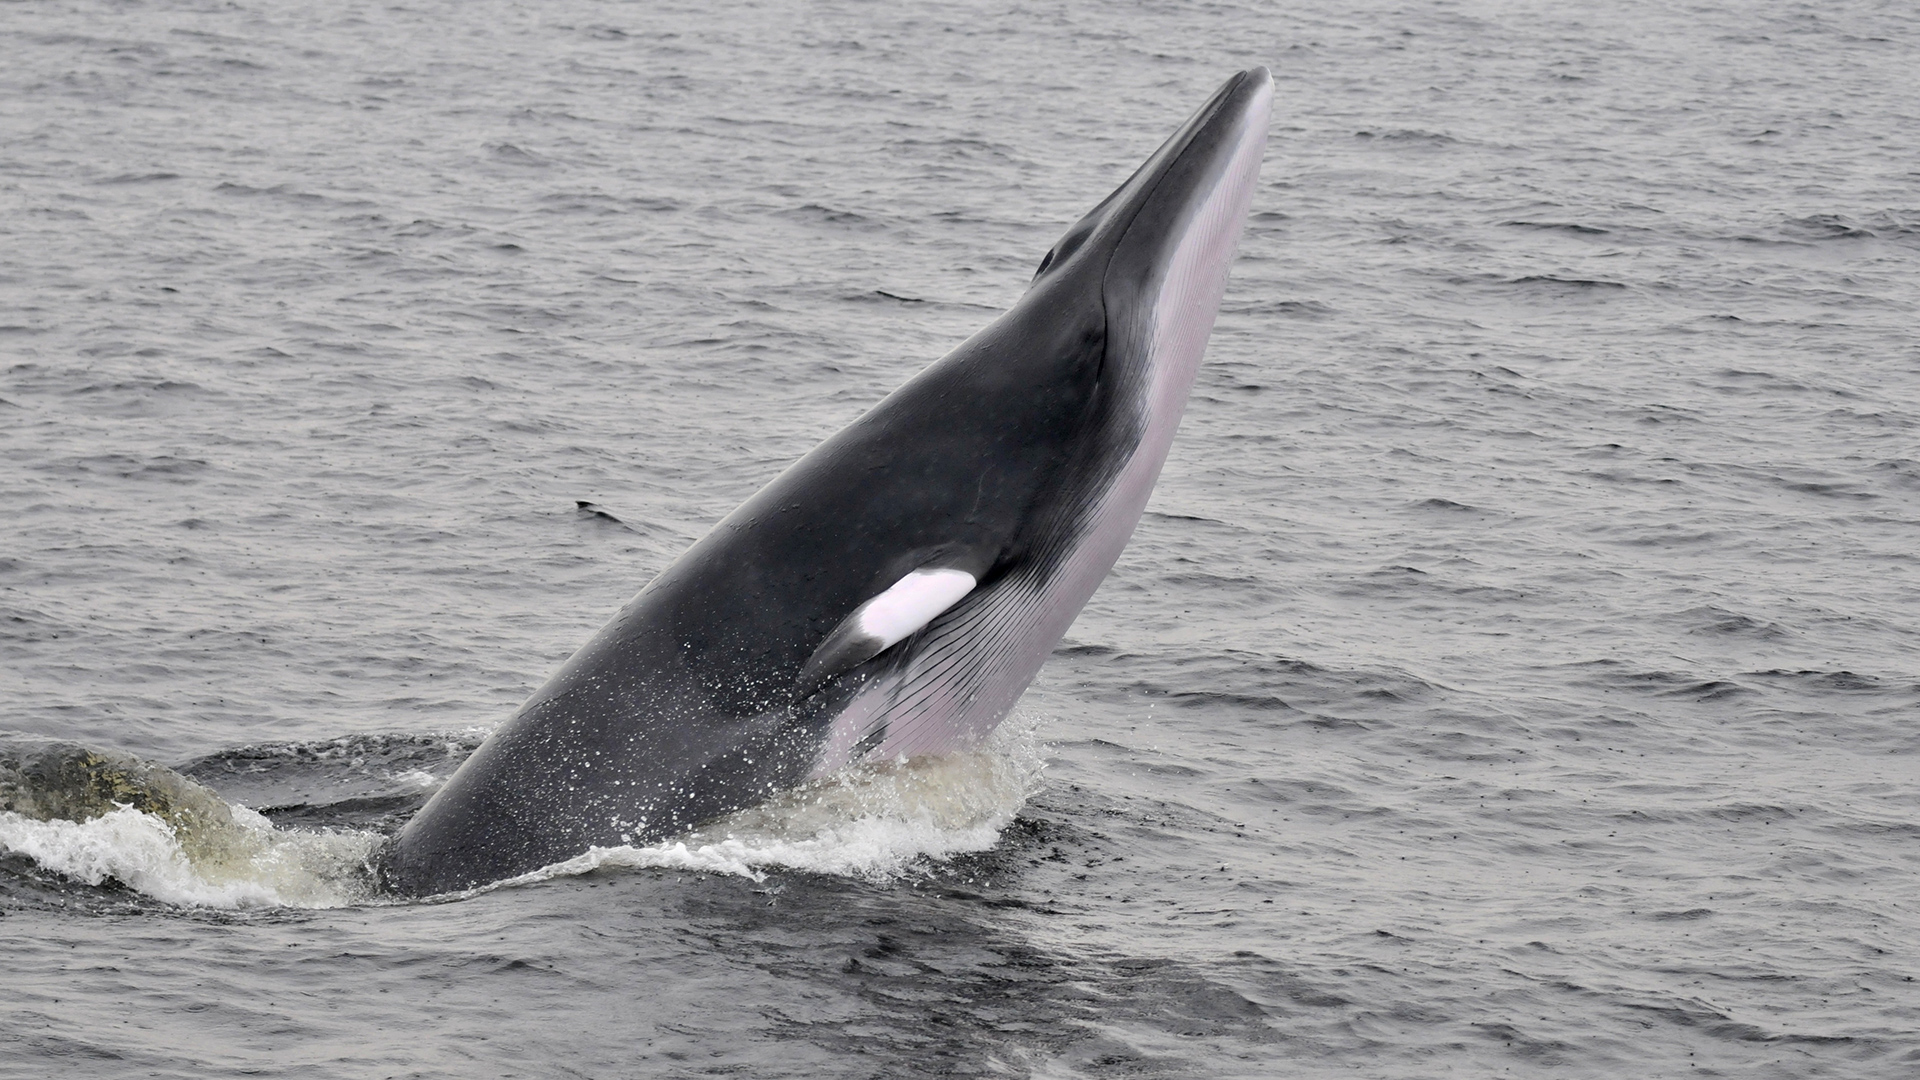 Half of the minke whale’s body can be seen out of the water as it lunges straight ahead.